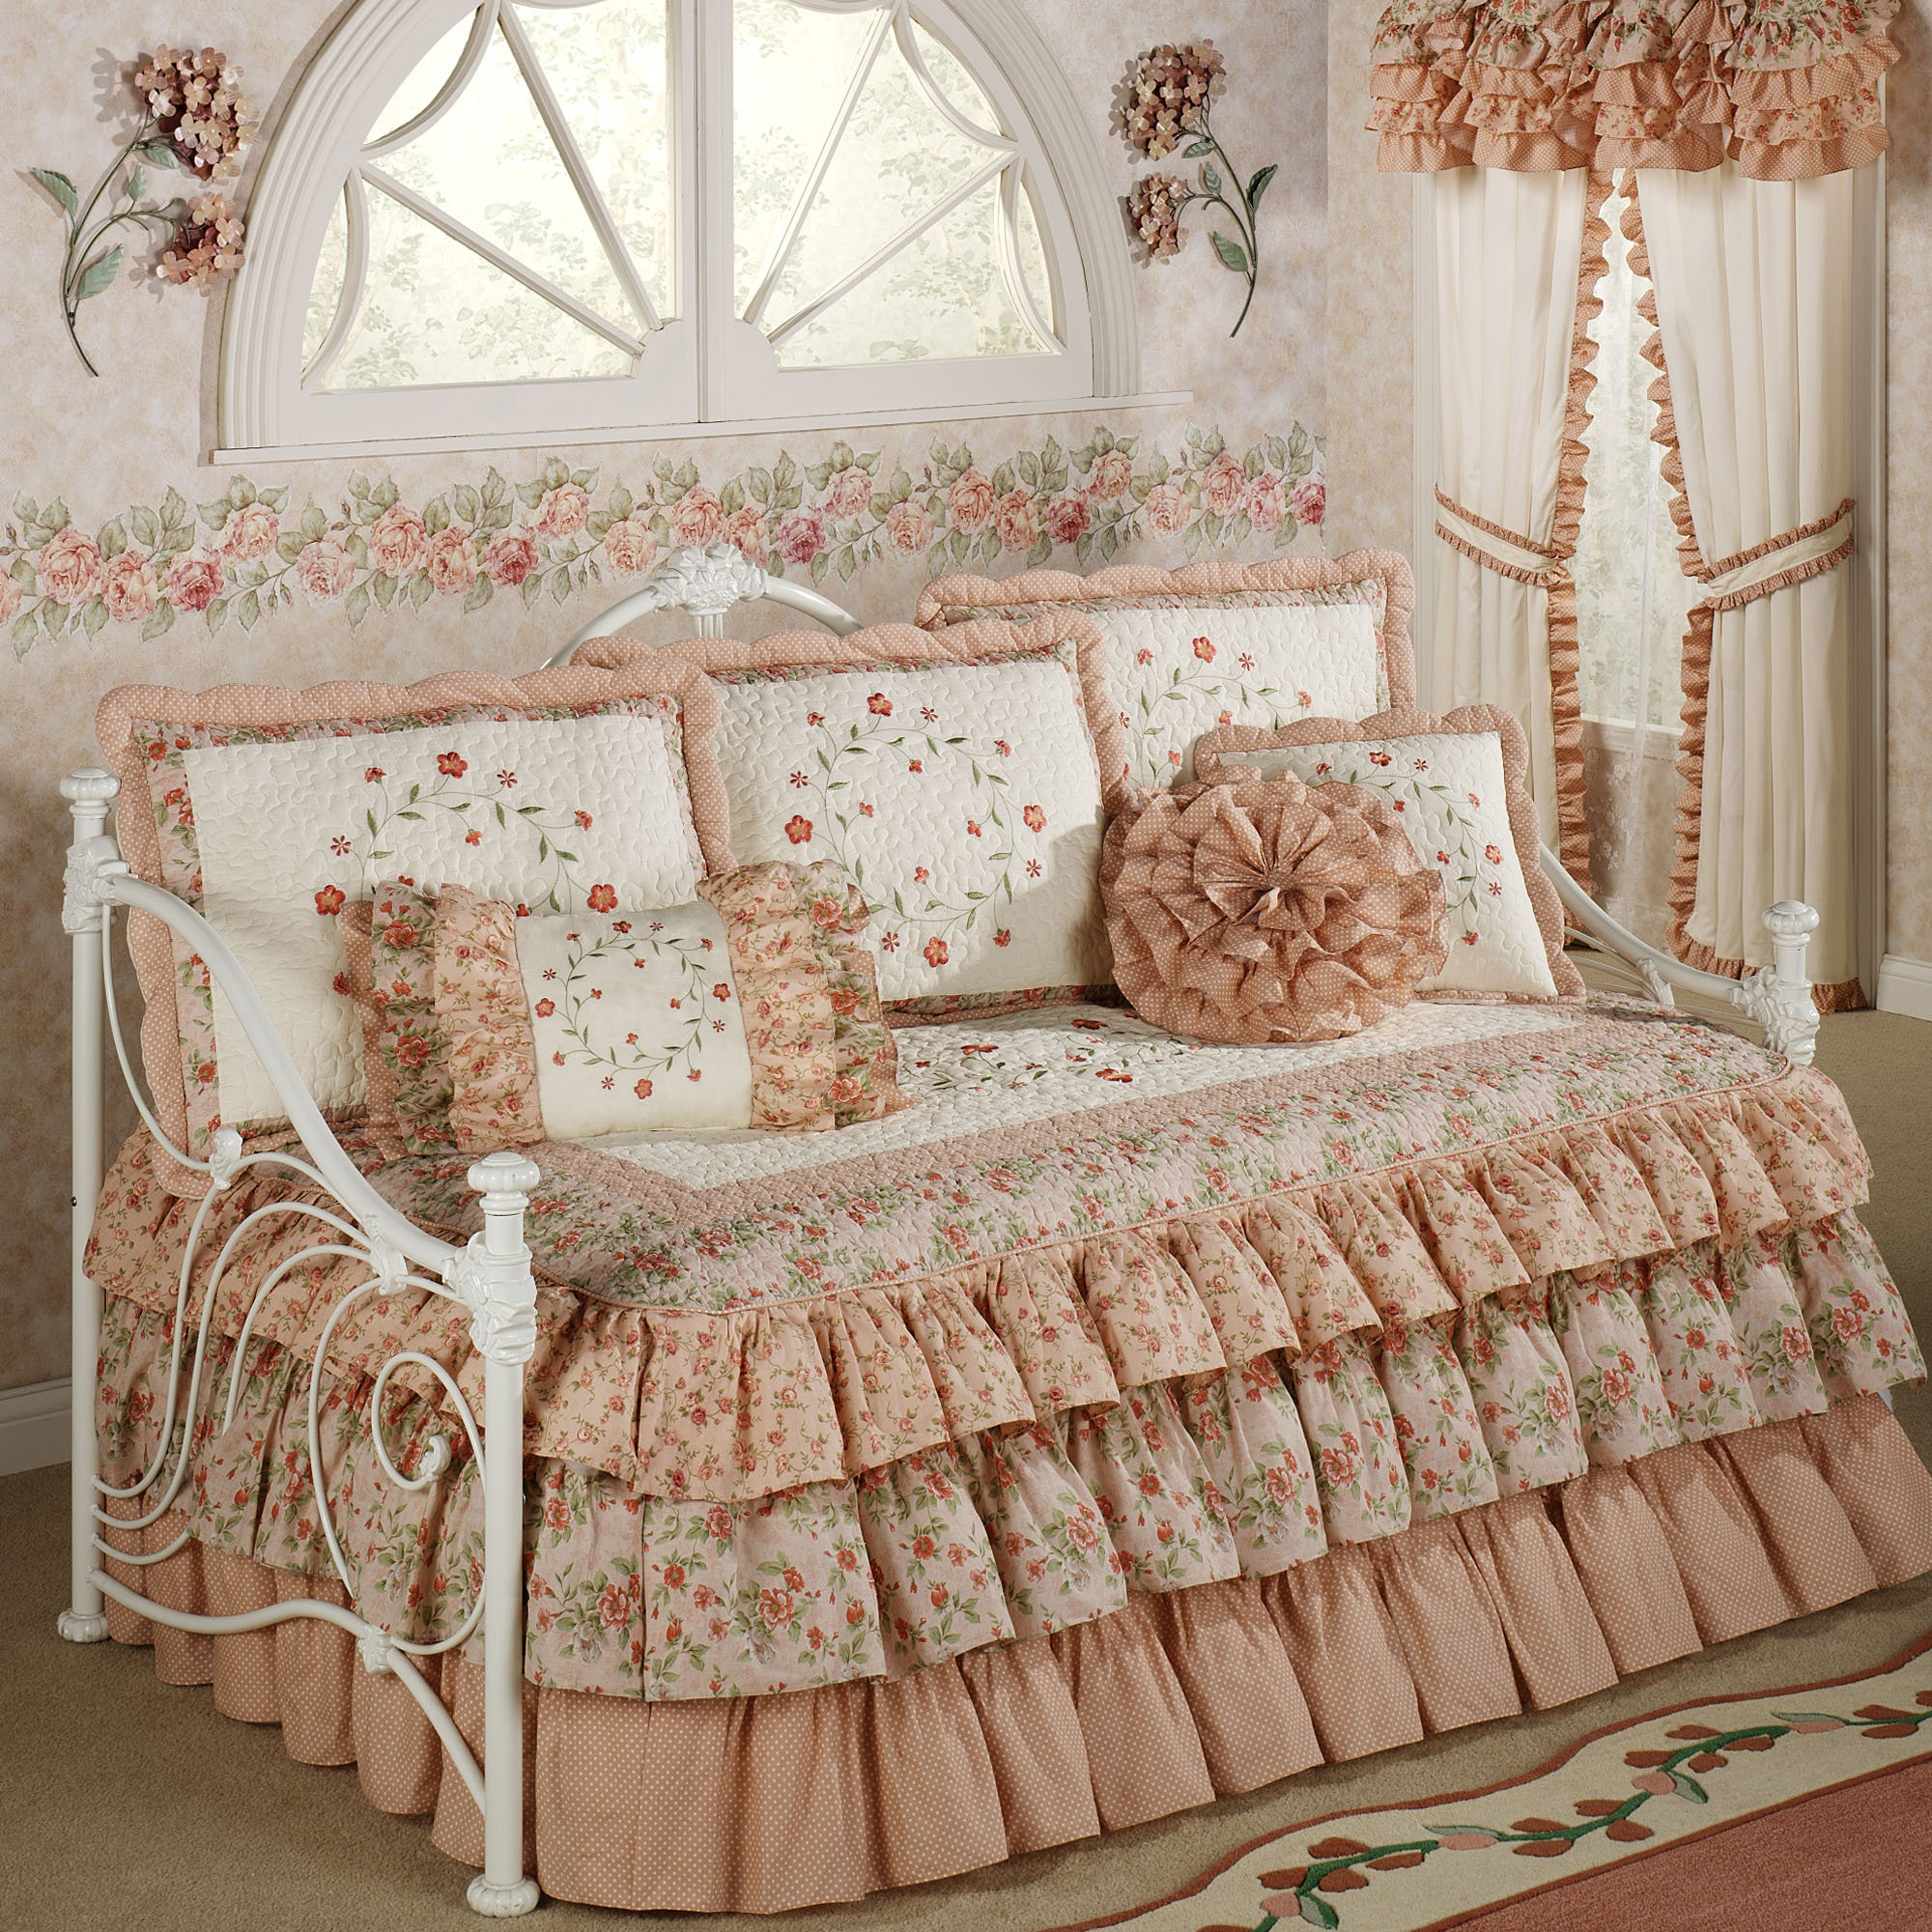 daybed bedding sets sears photo - 3